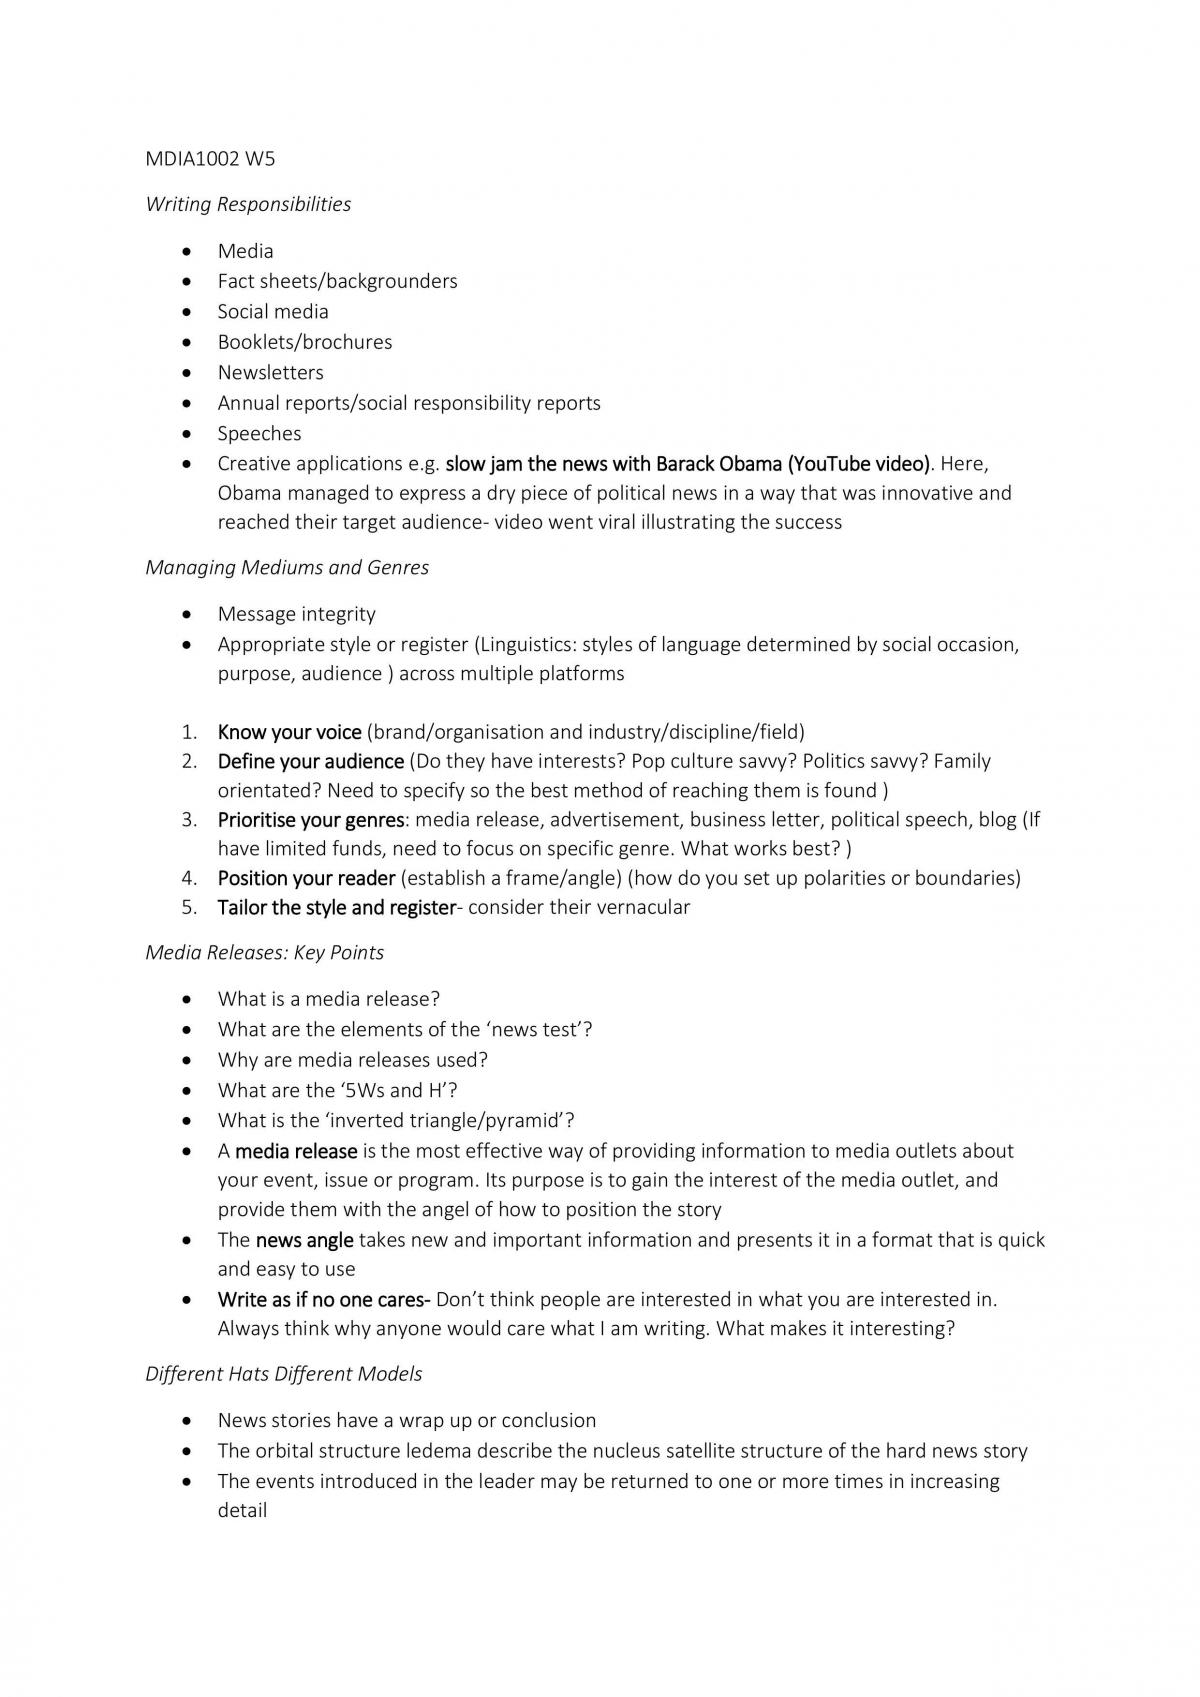 MDIA1002 Study Notes Week 5 to 8 - Page 1